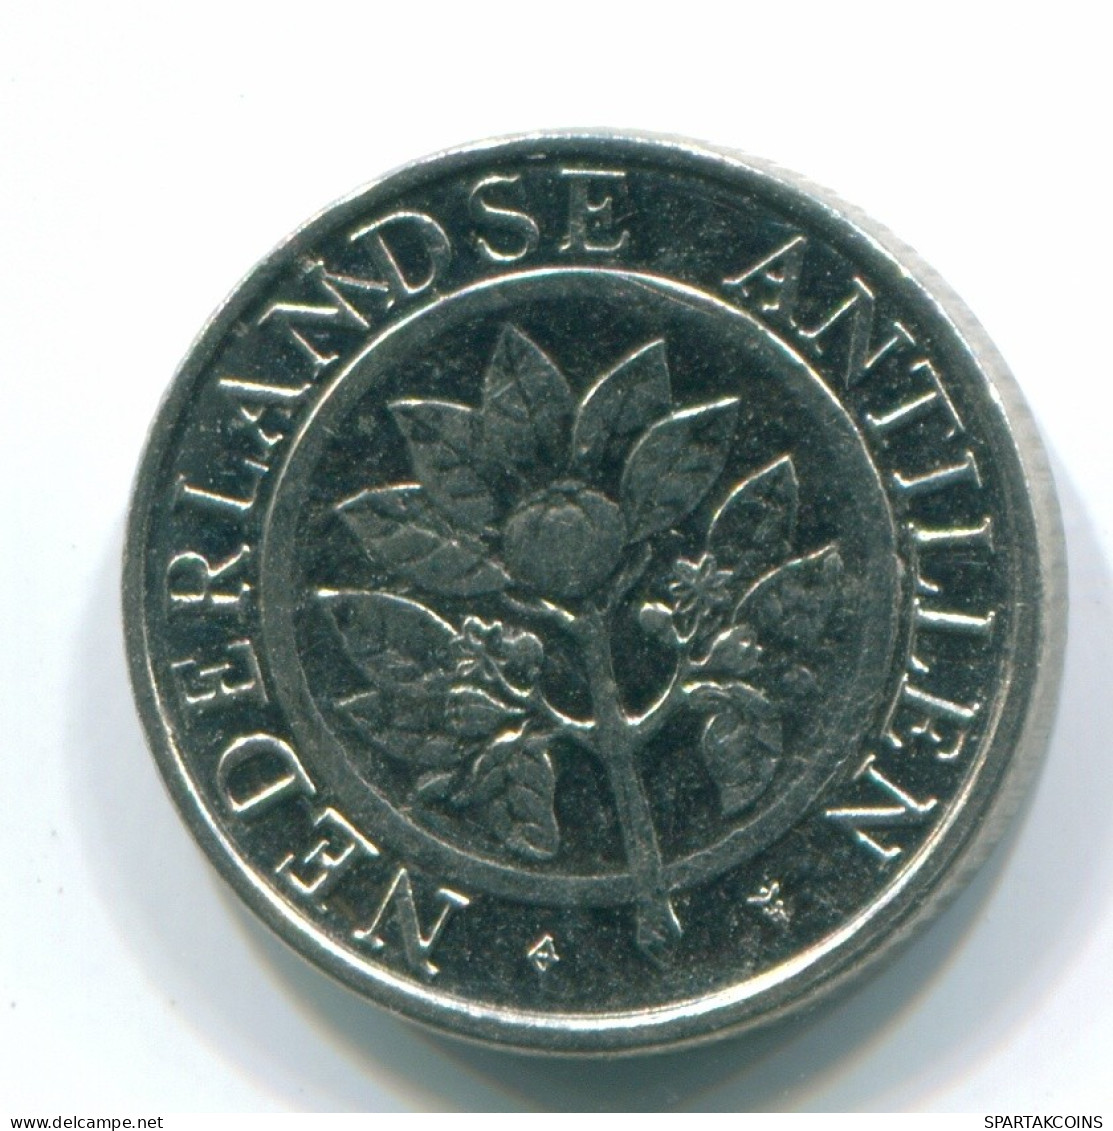 10 CENTS 1991 NETHERLANDS ANTILLES Nickel Colonial Coin #S11328.U.A - Antille Olandesi